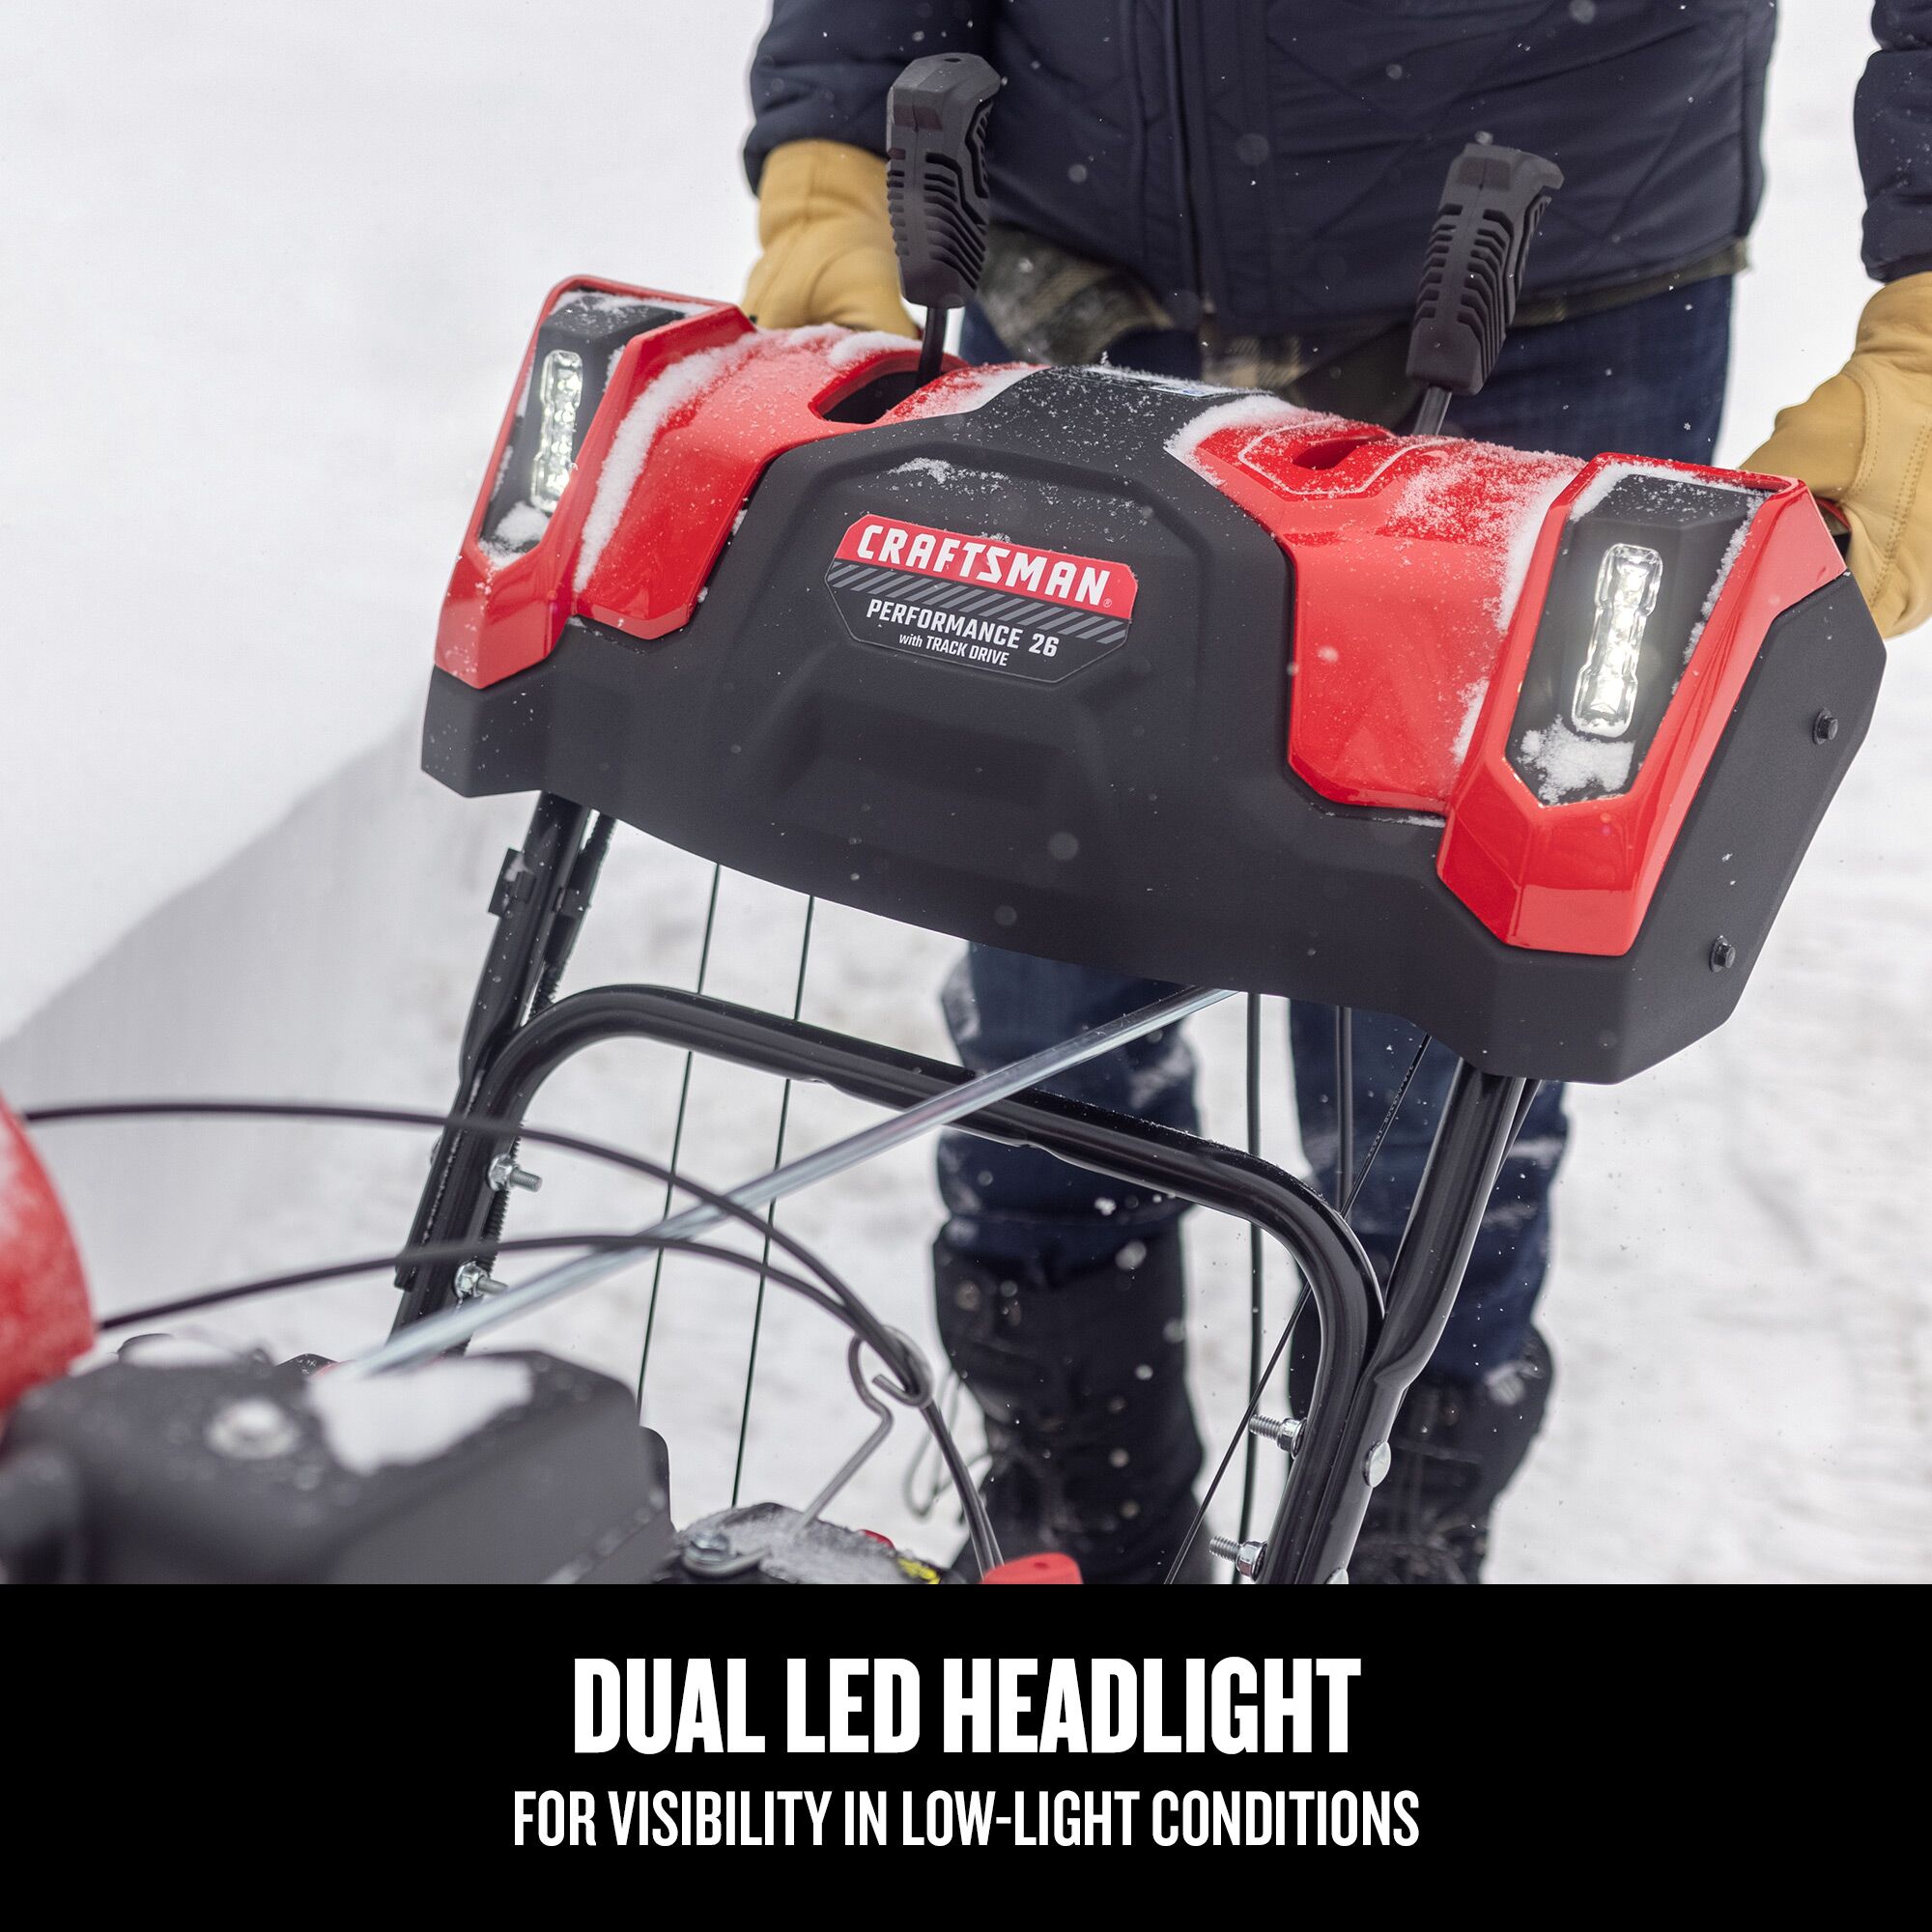 CRAFTSMAN 26-in. 243-cc Two-Stage Gas Snow Blower focused in on dual led headlight